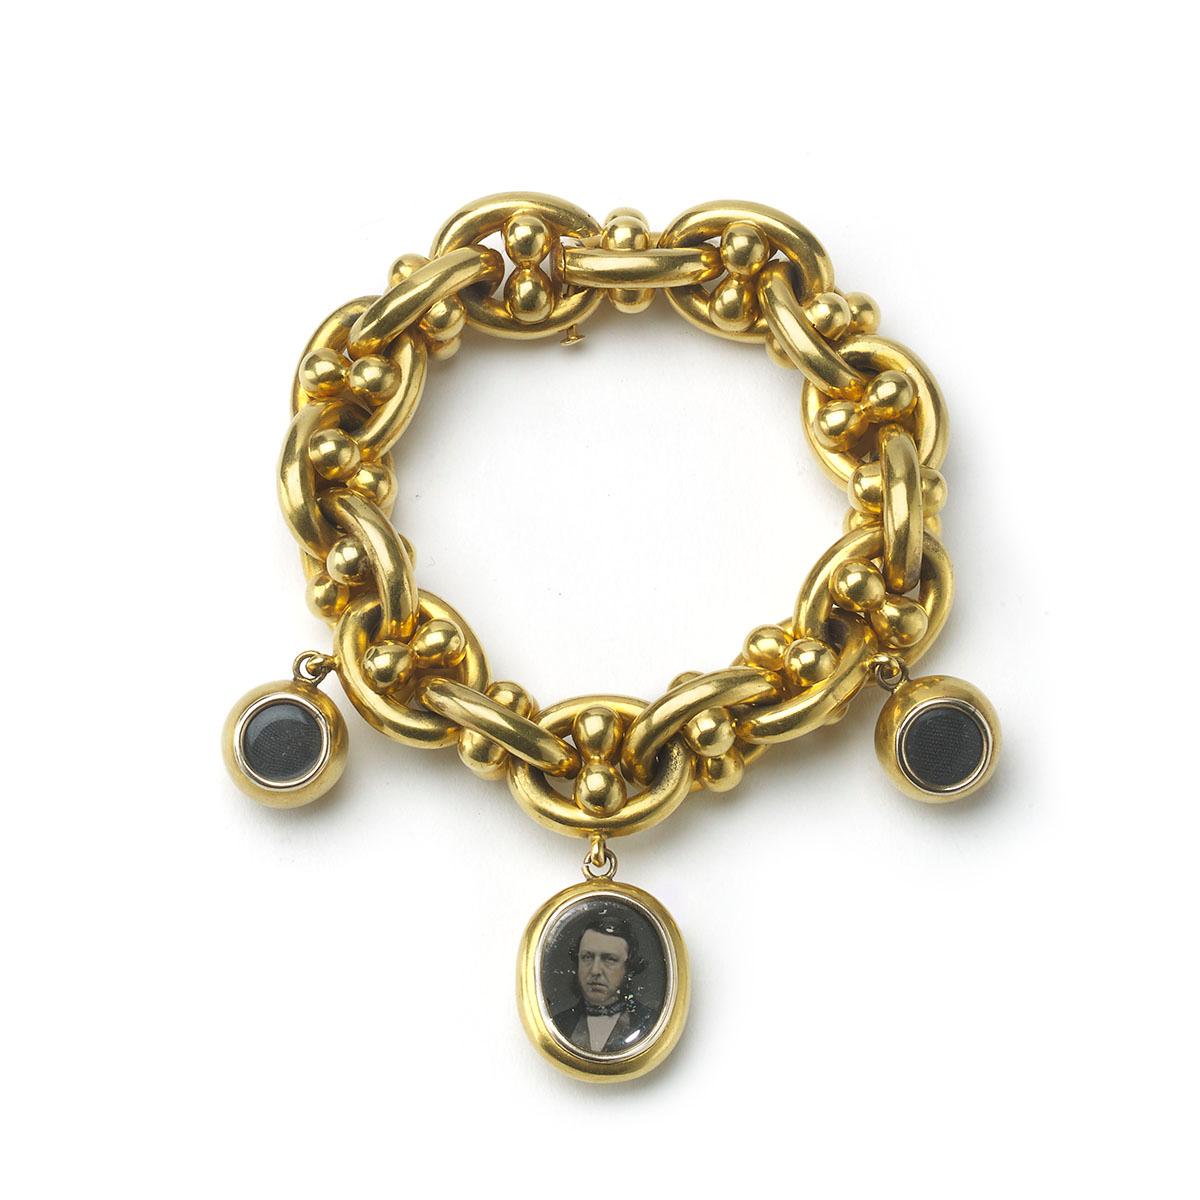 A Victorian, fancy oval link nautical gold bracelet, with an oval locket charm, containing a tinted collodion positive or ambrotype glass photograph of a gentlemen in Victorian dress, the reverse bearing an embossed anchor with entwined rope, with